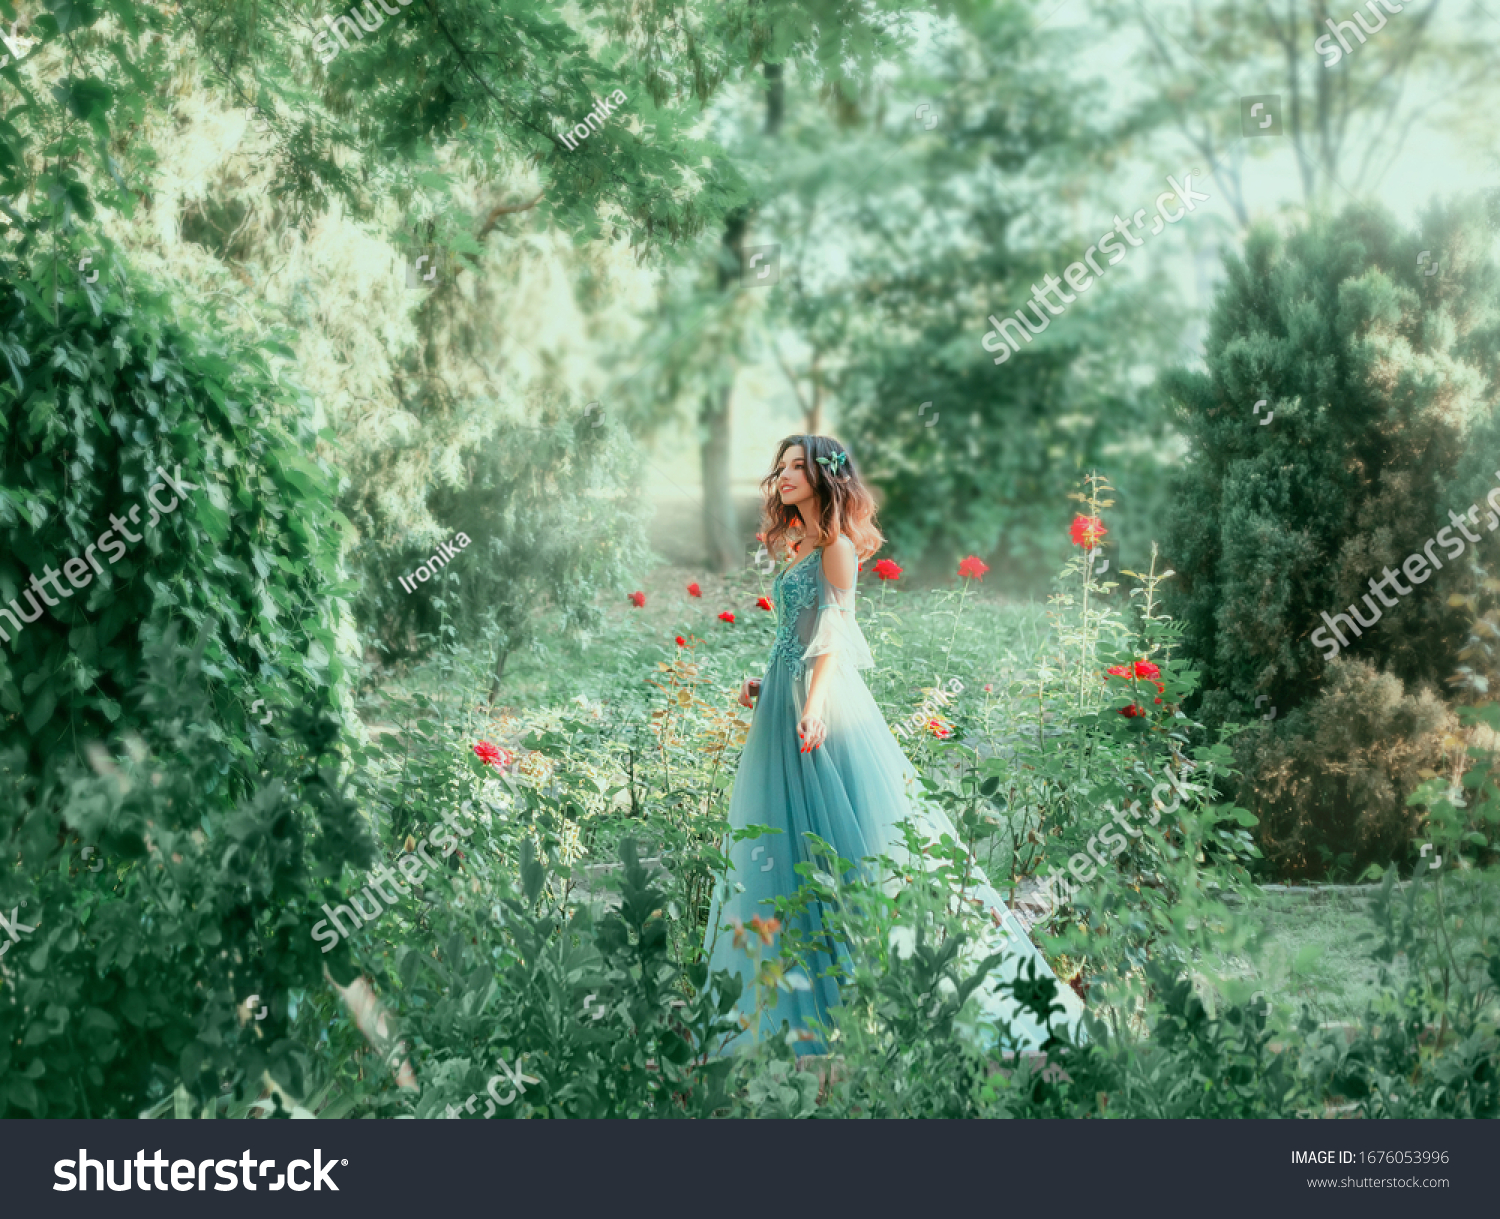 Вrunette girl wavy hair Hairstyle. green fairy forest. Medieval young beautiful woman Princess. blue vintage watercolor fluffy full dress, long train. Backdrop summer nature, garden trees red roses #1676053996